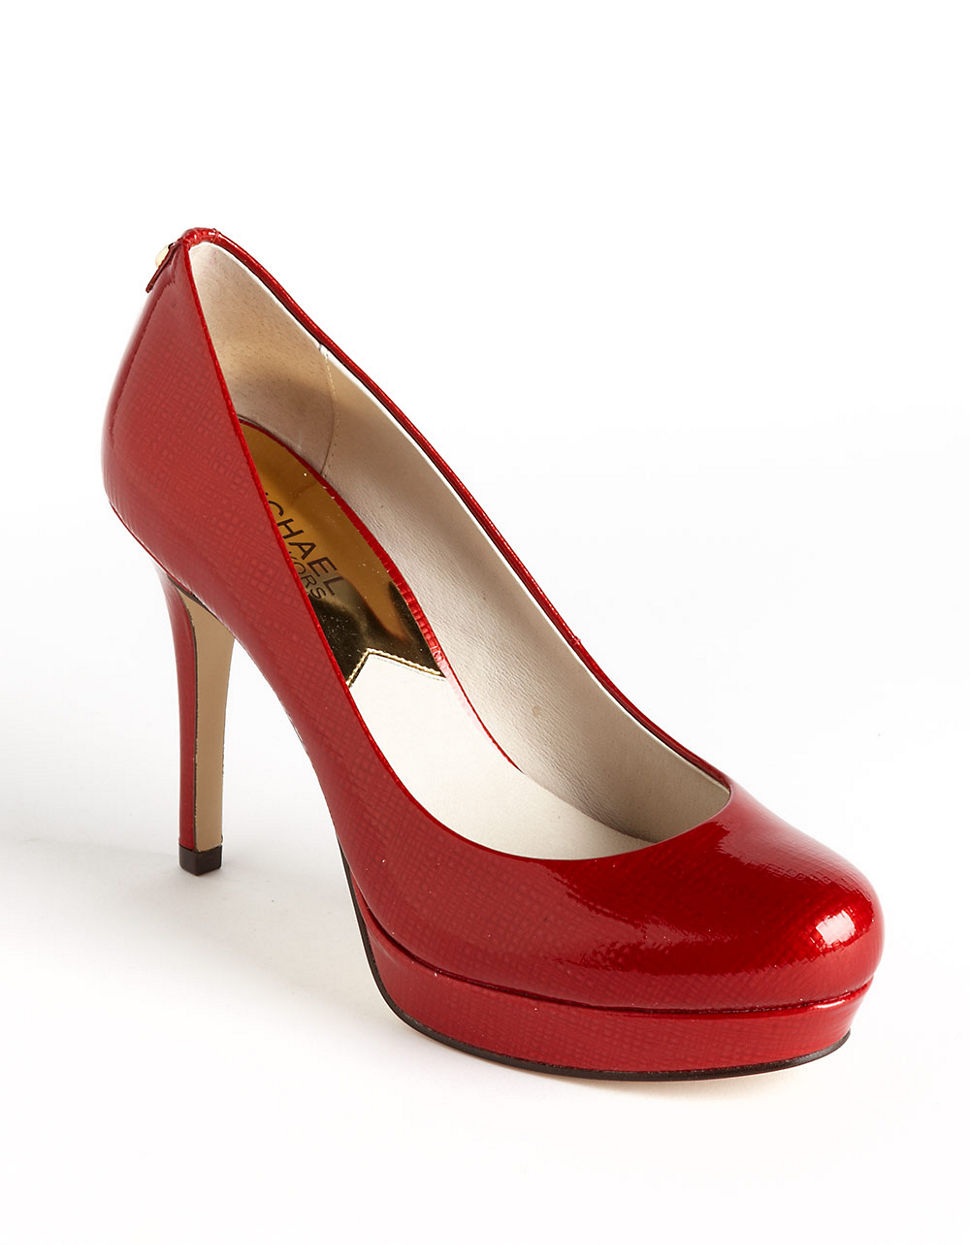 Lyst - Michael Michael Kors Ionna Patent Leather Platform Pumps in Red